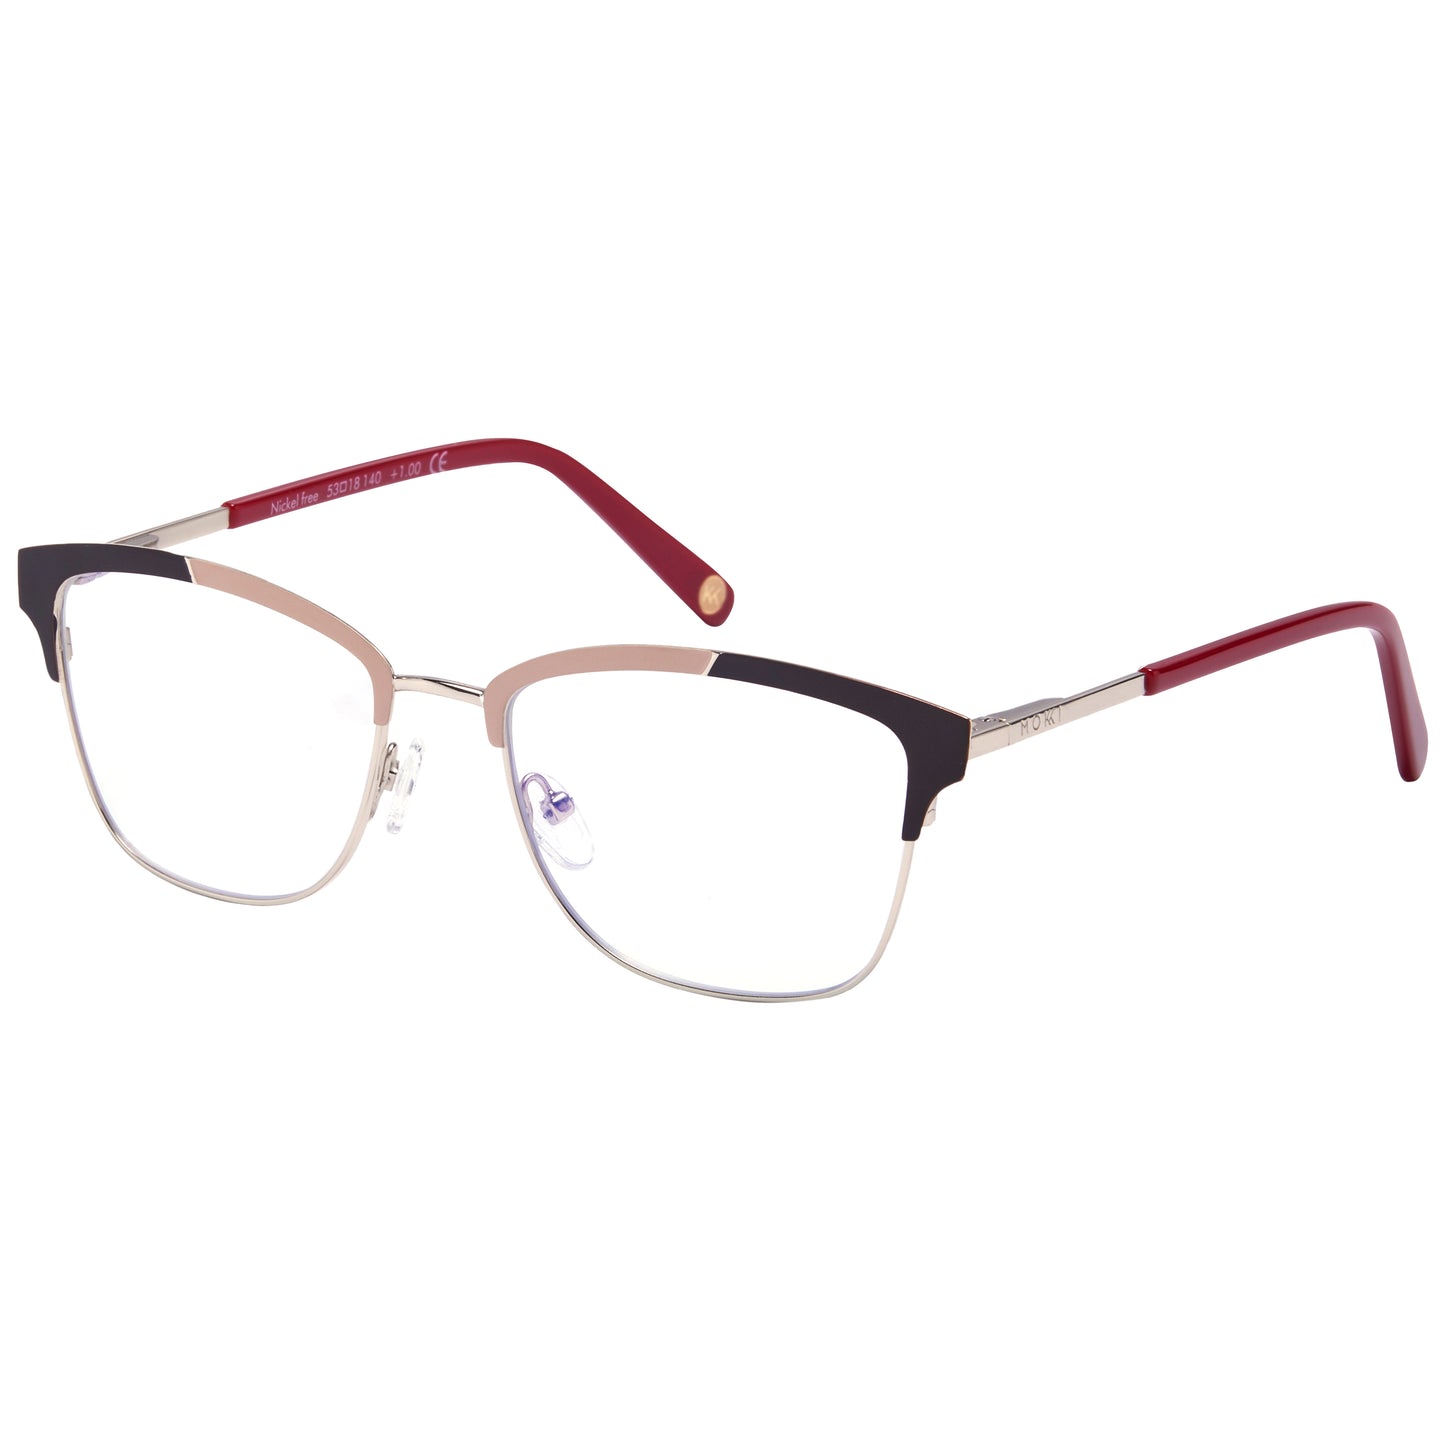 Mokki Edgy Readers reading glasses in red